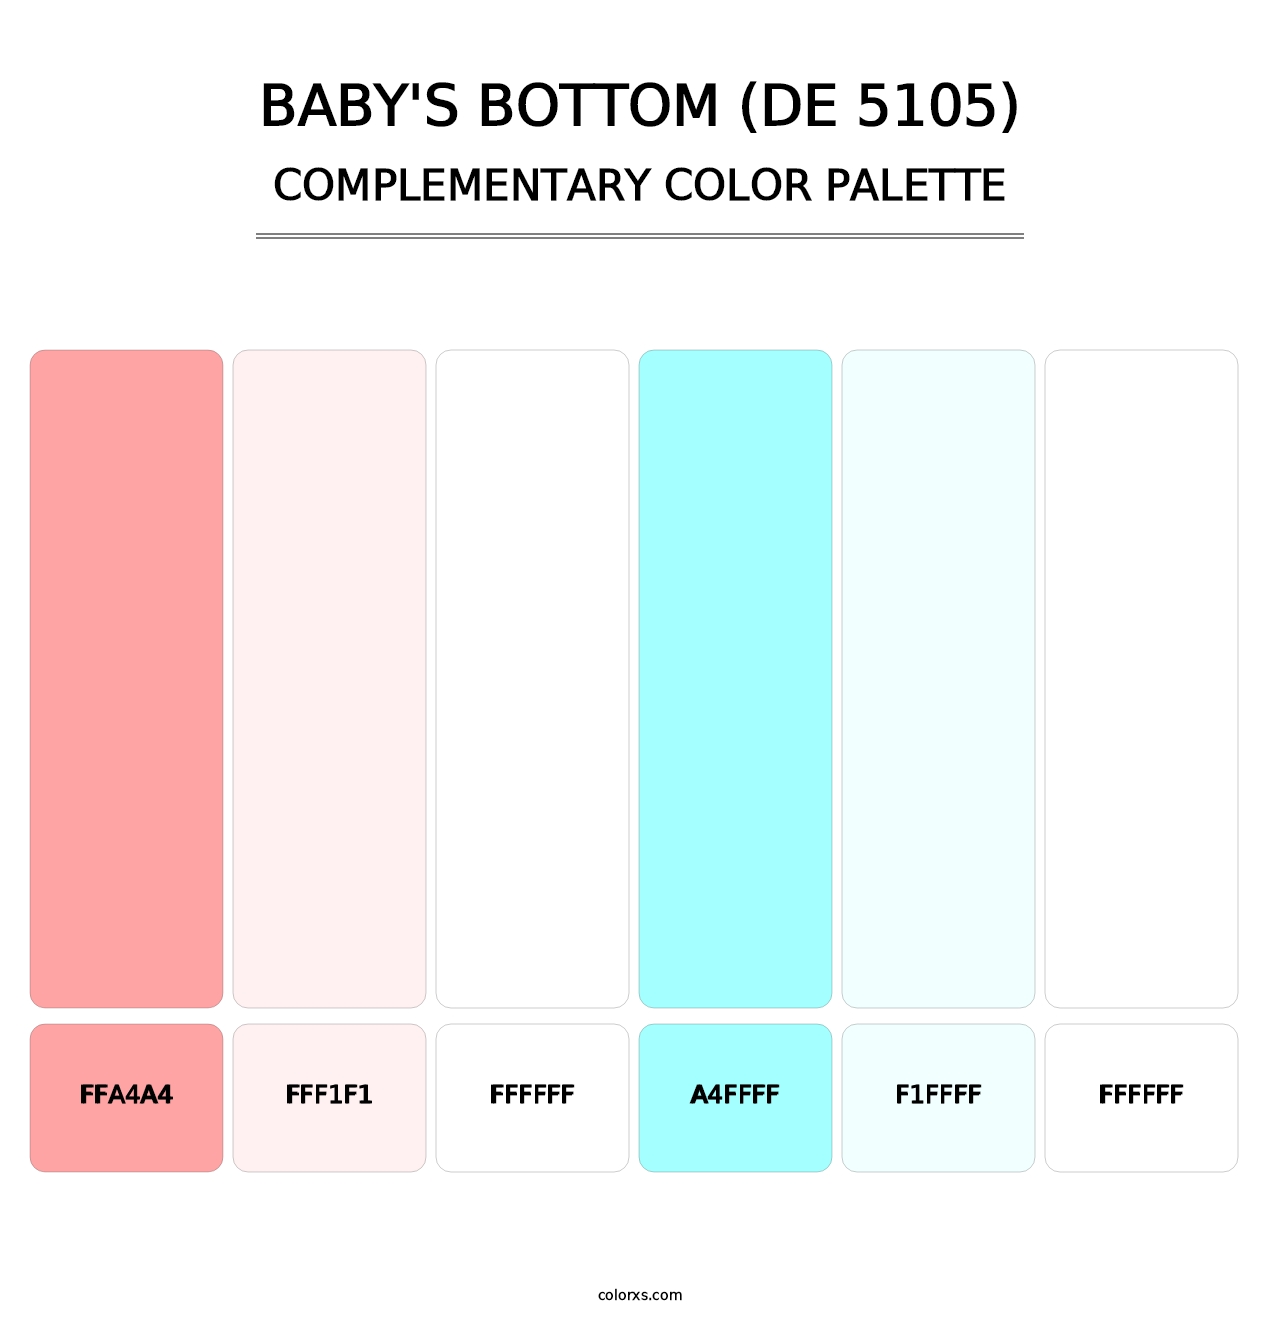 Baby's Bottom (DE 5105) - Complementary Color Palette